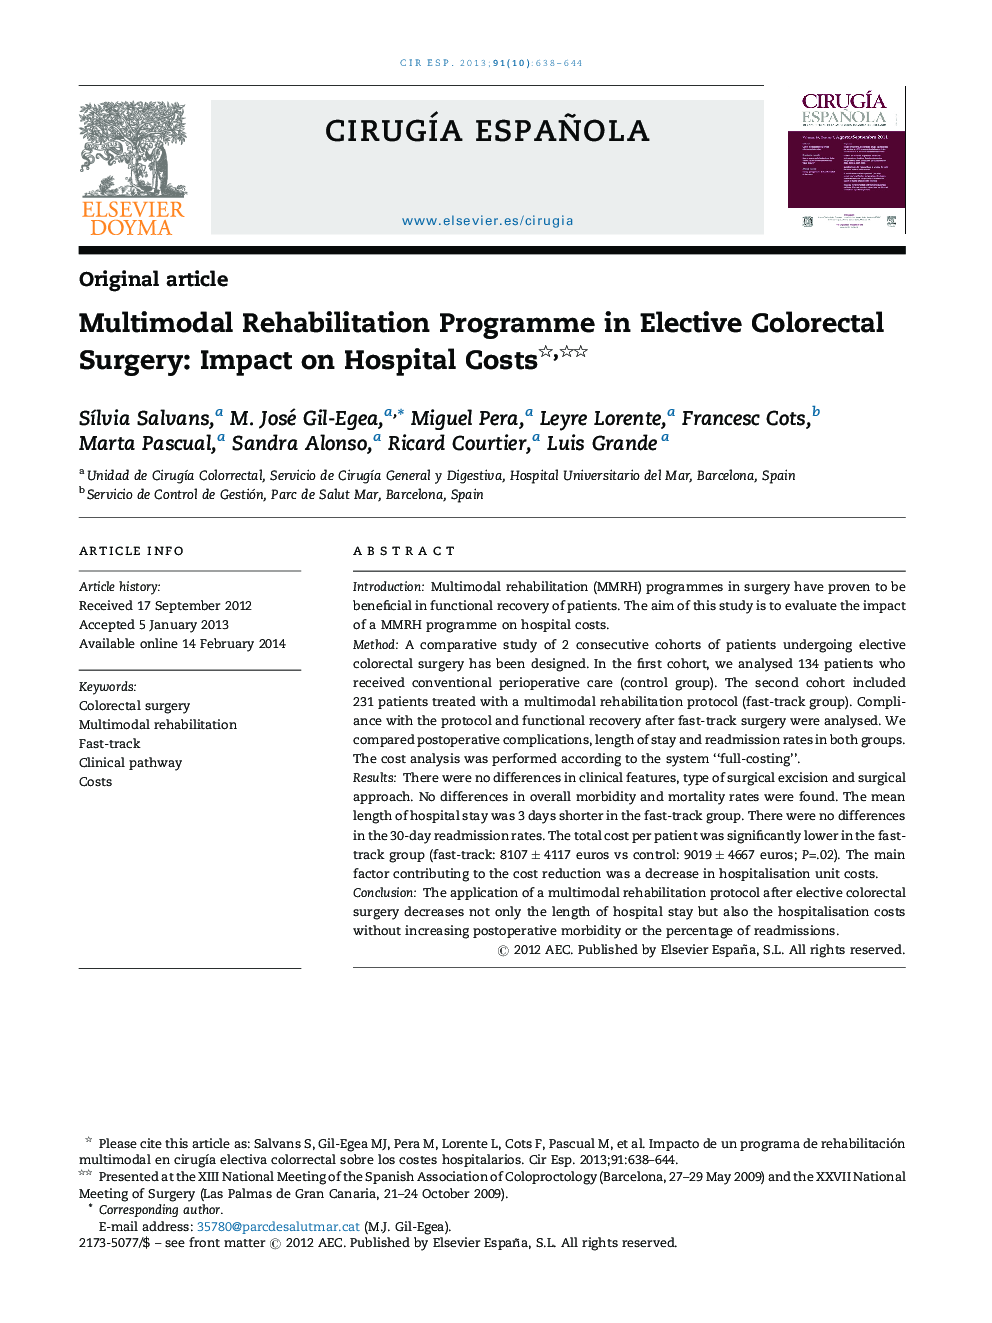 Multimodal Rehabilitation Programme in Elective Colorectal Surgery: Impact on Hospital Costs 